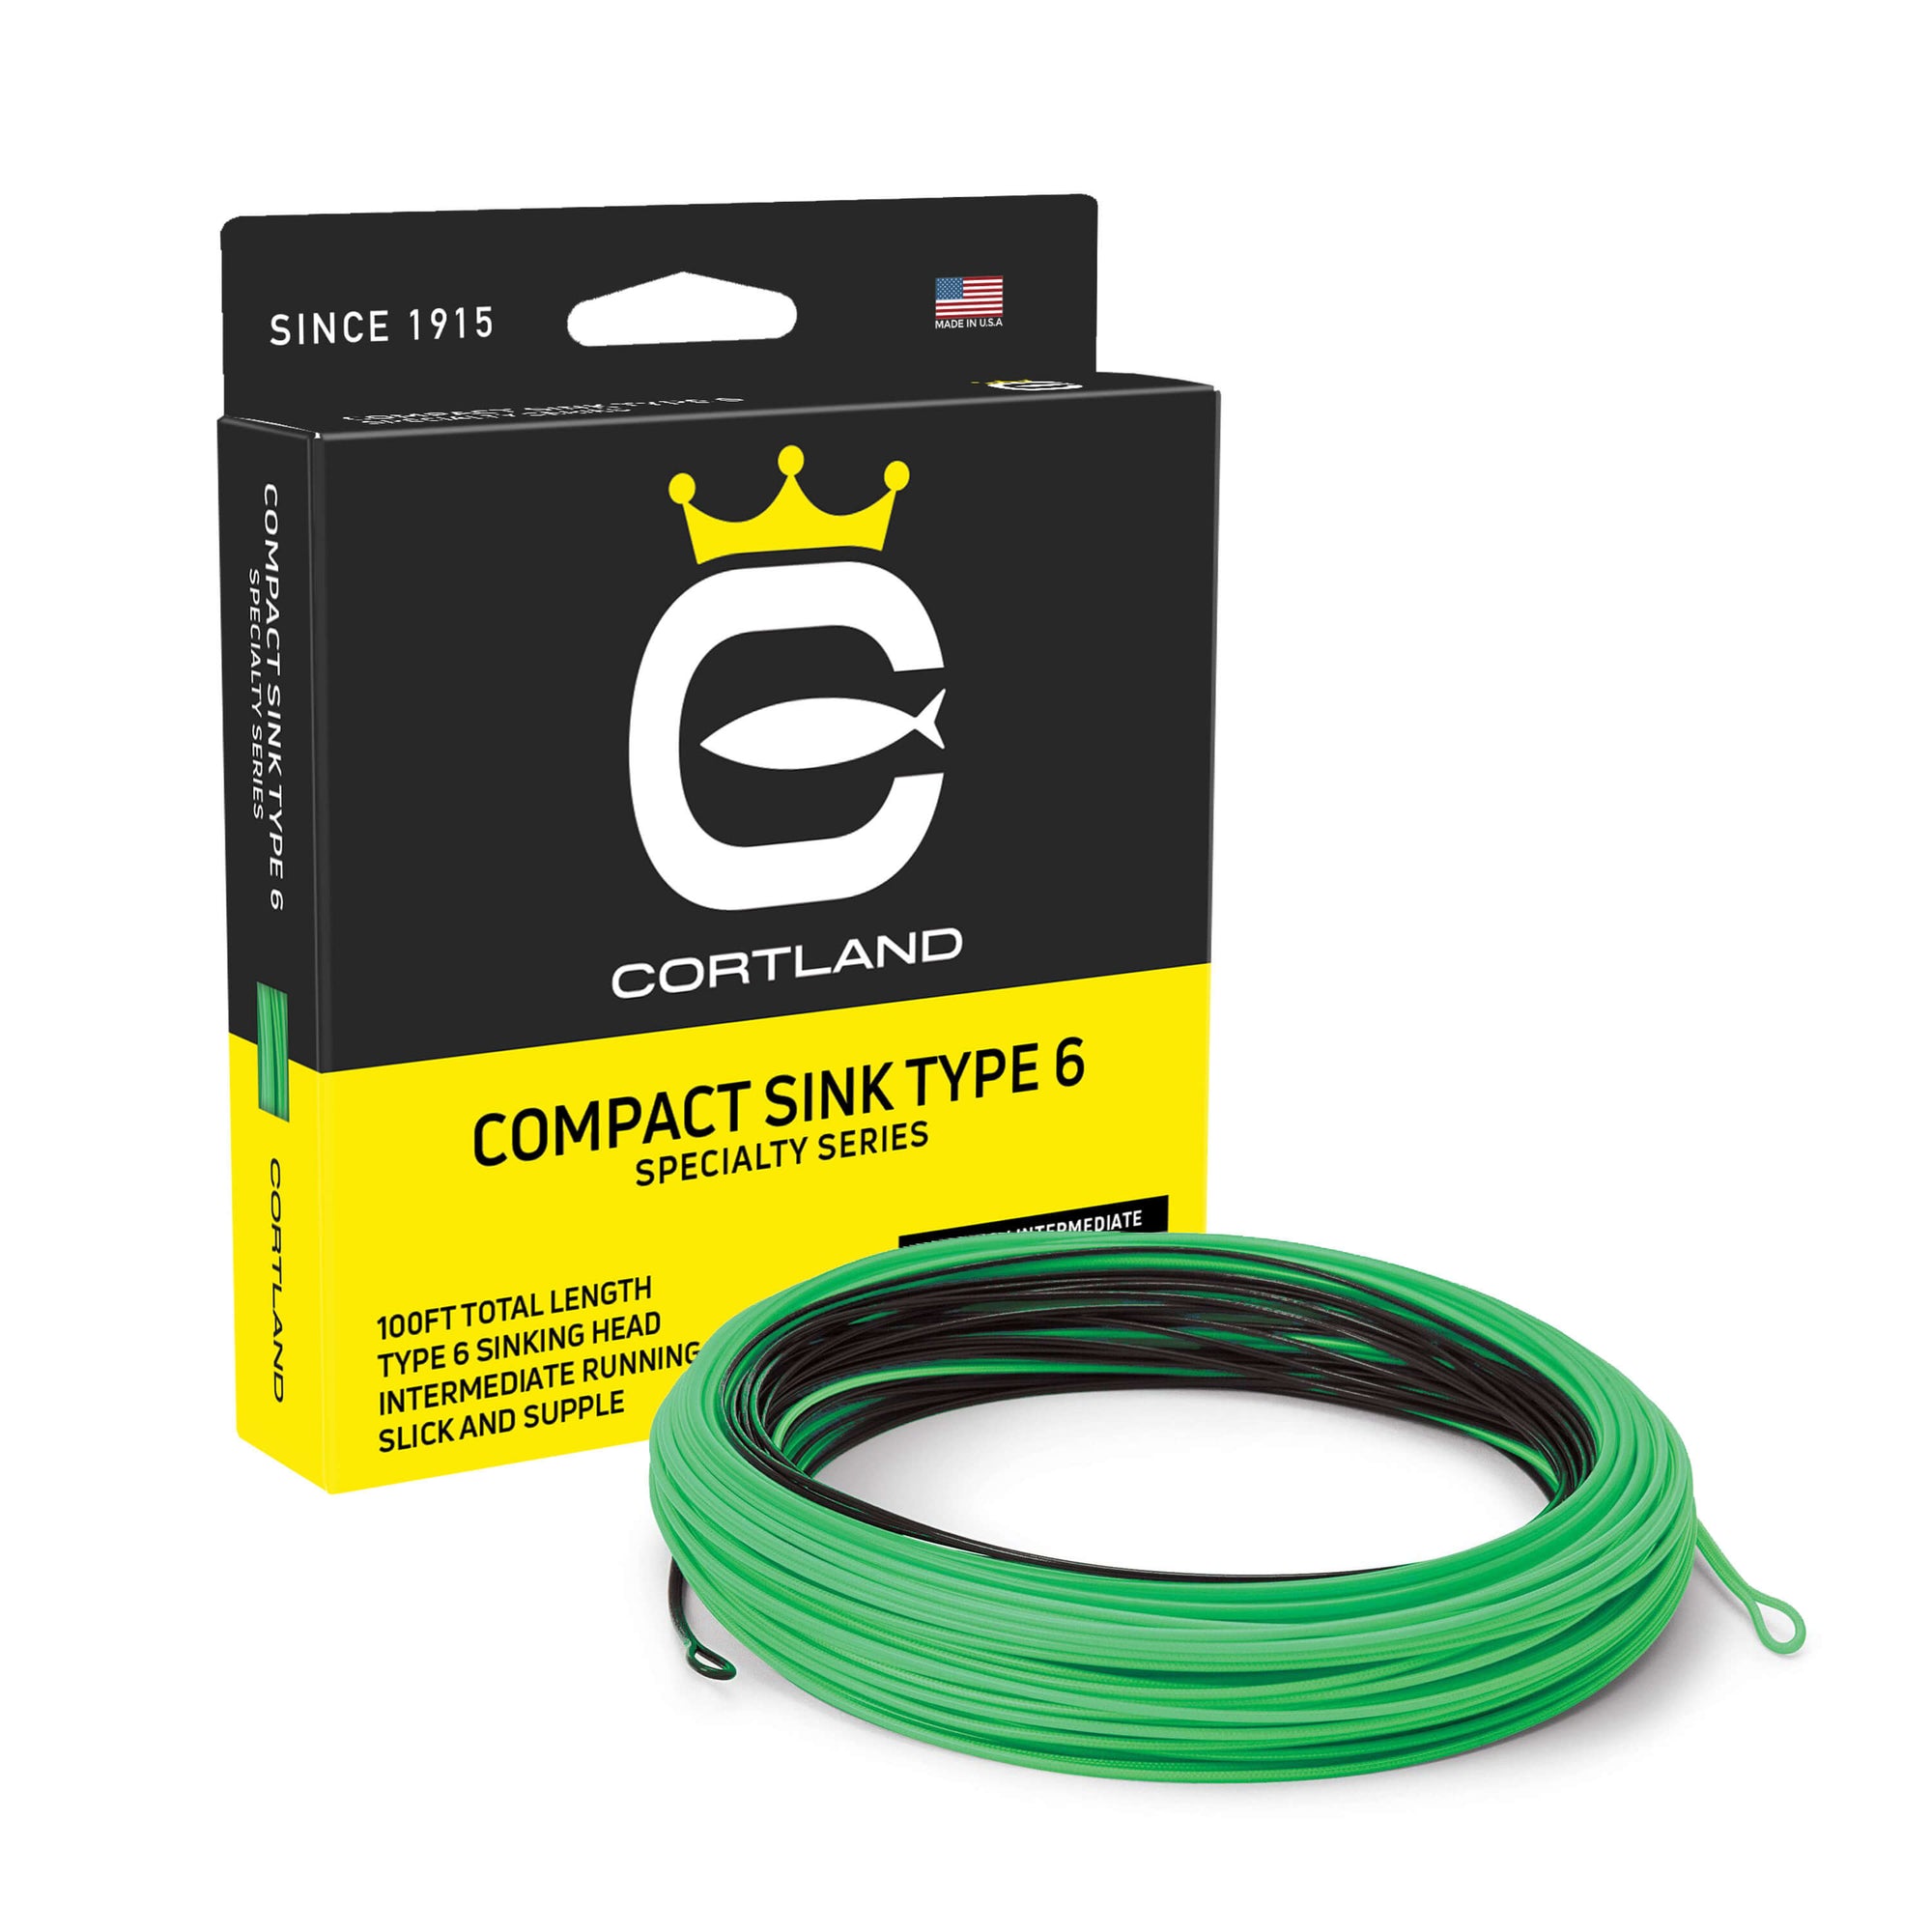 Cortland Specialty Compact Sink Fly Line Size 5/6 WT Sink Type 6